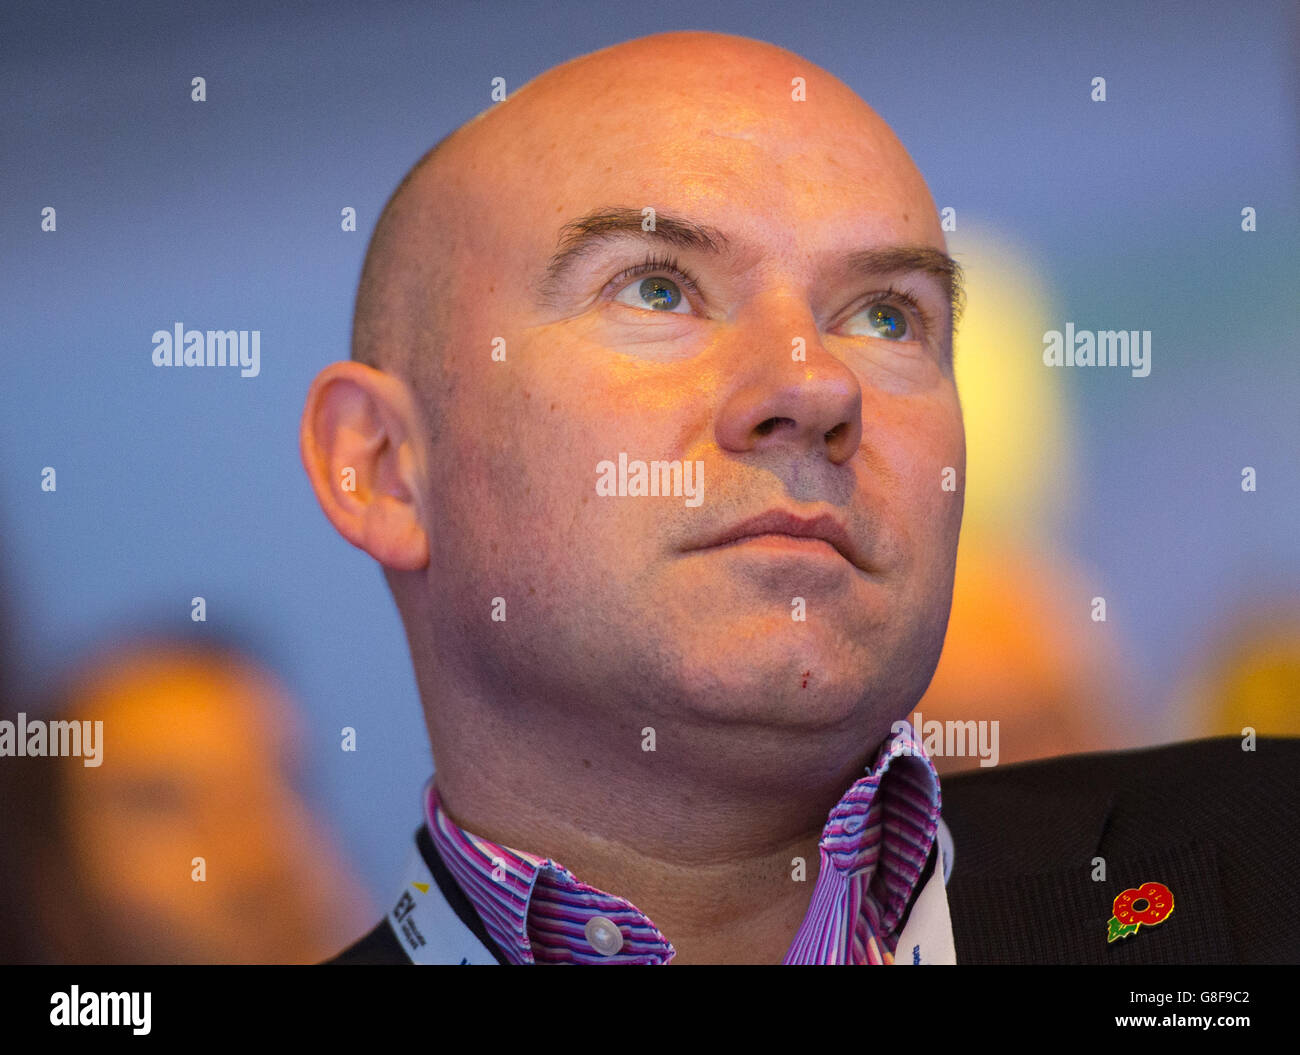 Neil Bentley of OUTstanding at the annual conference of the CBI (Confederation of British Industry) at the Grosvenor House Hotel in London. PRESS ASSOCIATION Photo. Picture date: Monday November 9, 2015. Photo credit should read: Dominic Lipinski/PA Wire Stock Photo